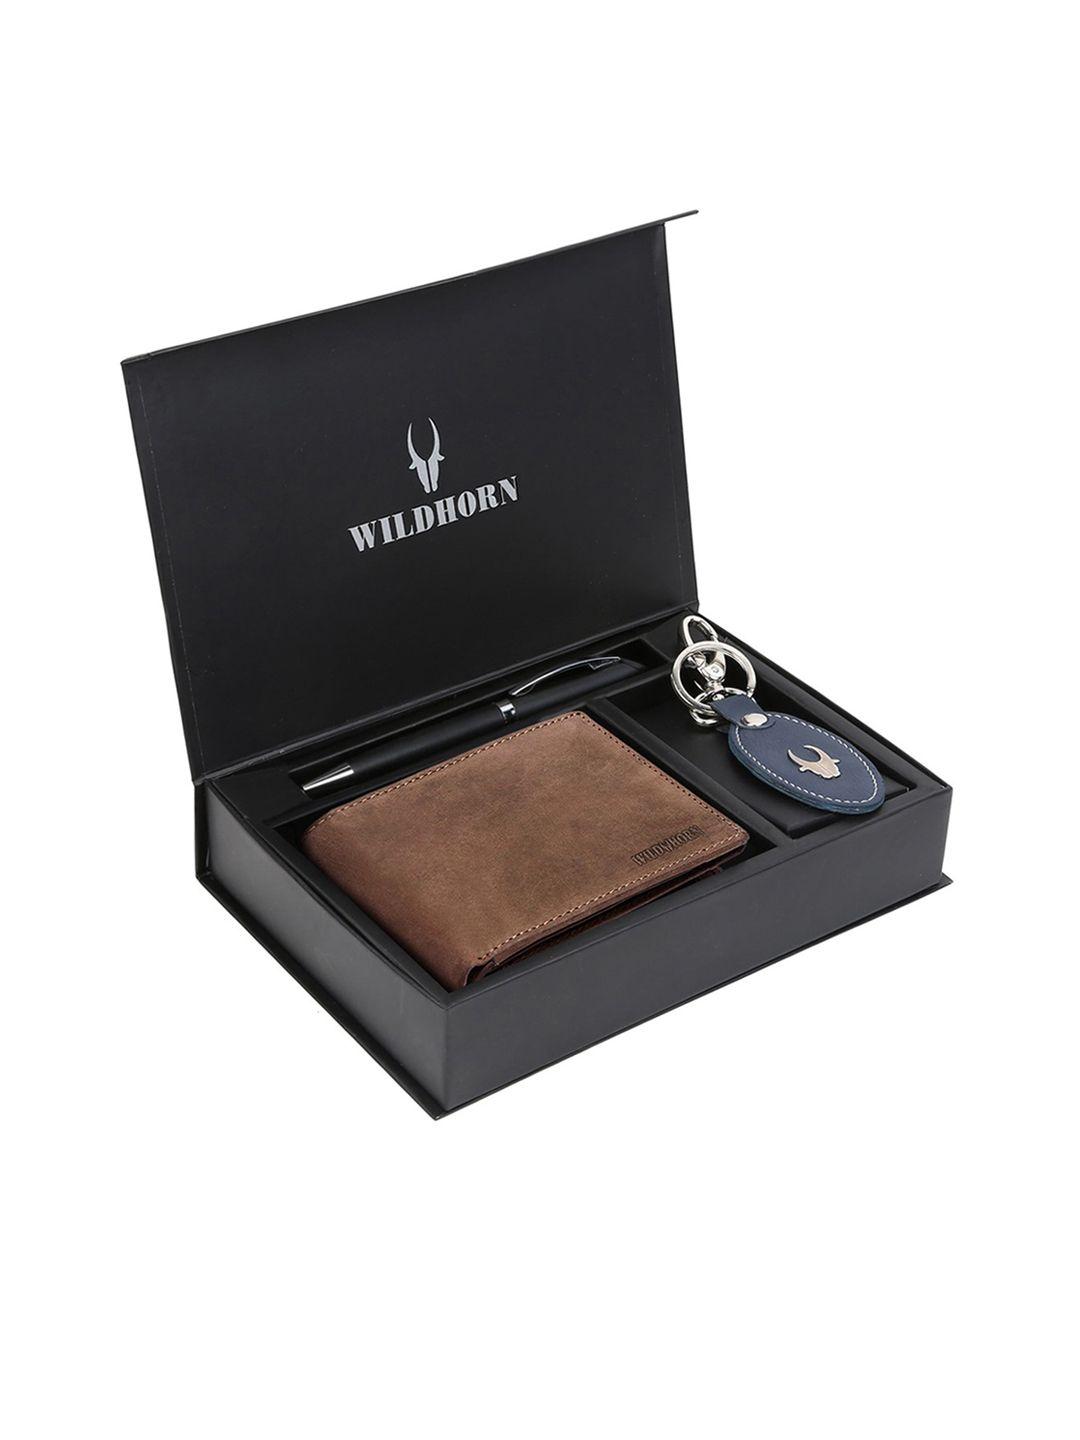 wildhorn men tan brown & blue rfid protected genuine leather accessory gift set